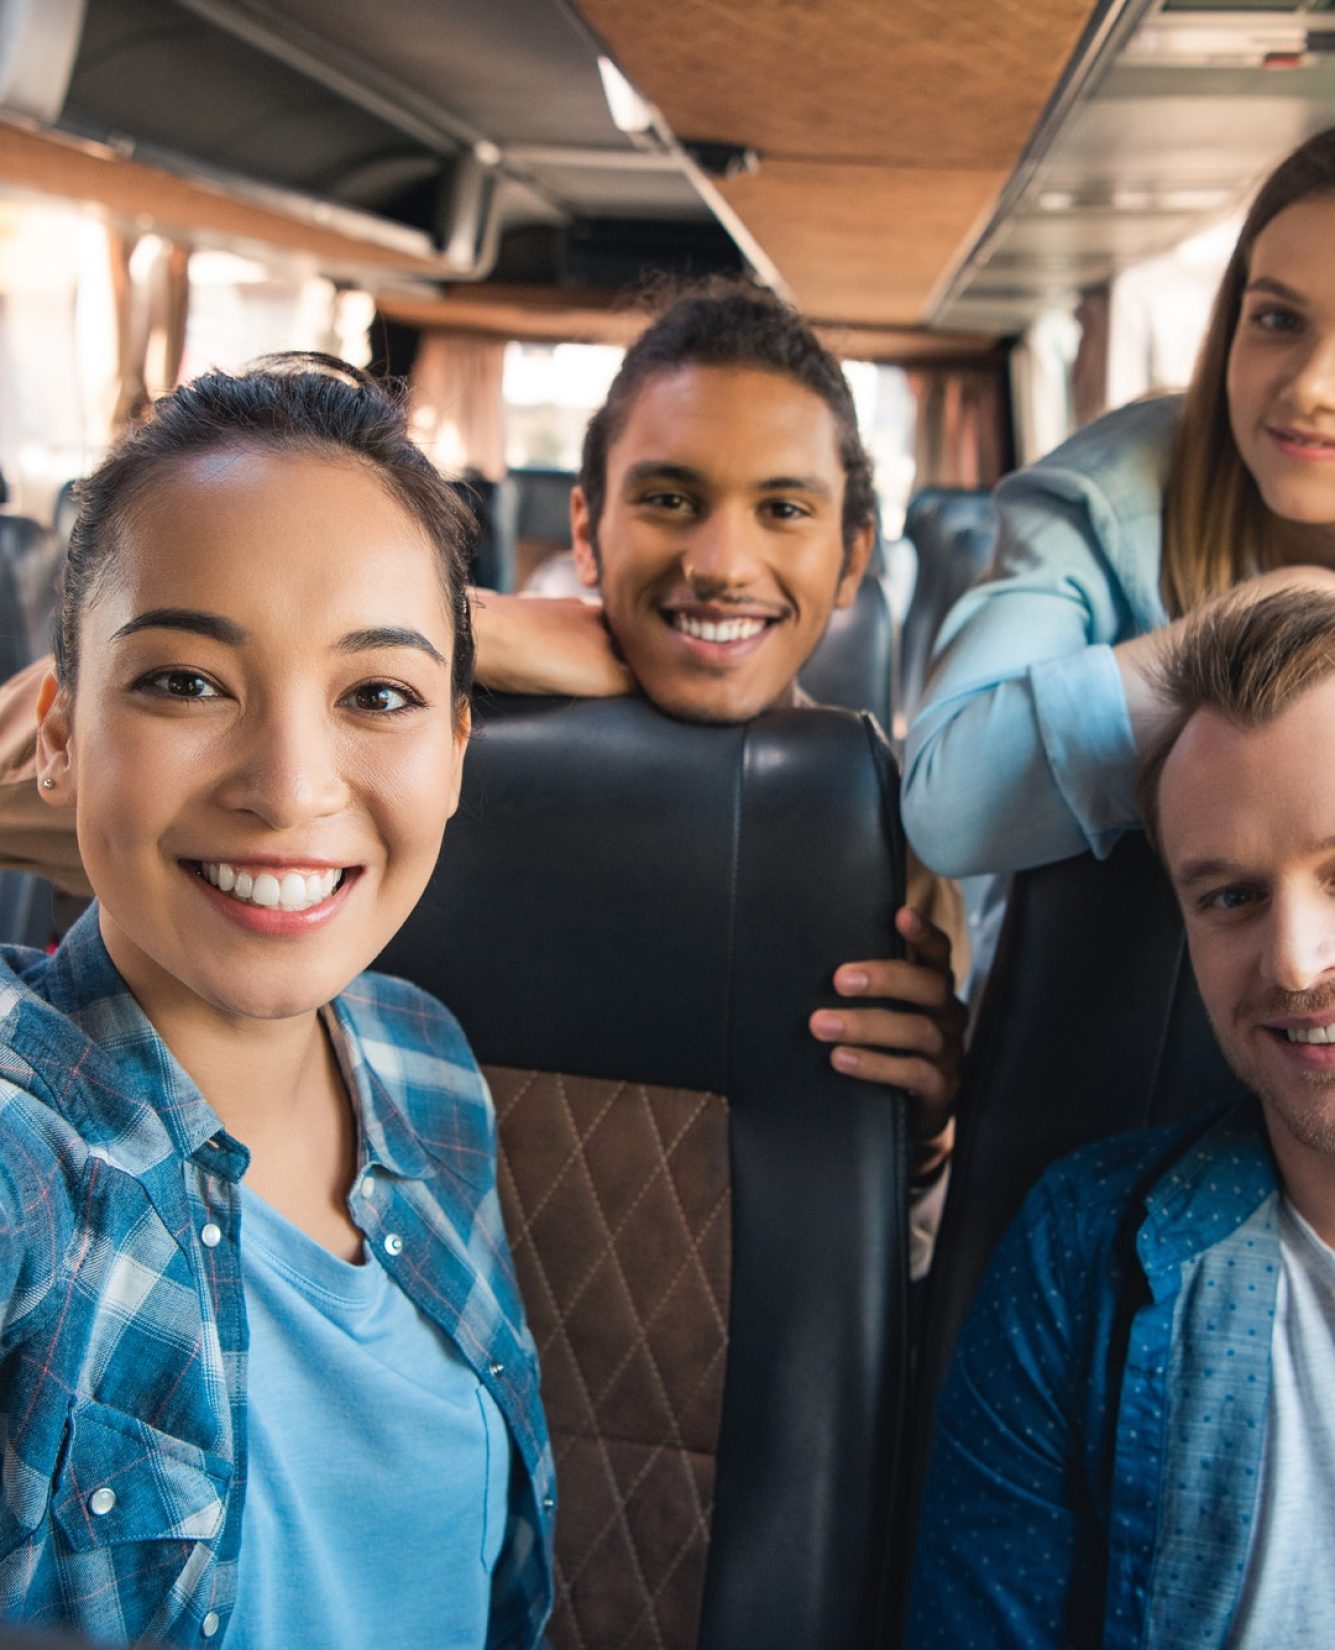 selective-focus-of-smiling-asian-woman-taking-selfie-with-multicultural-friends-in-travel-bus.jpg